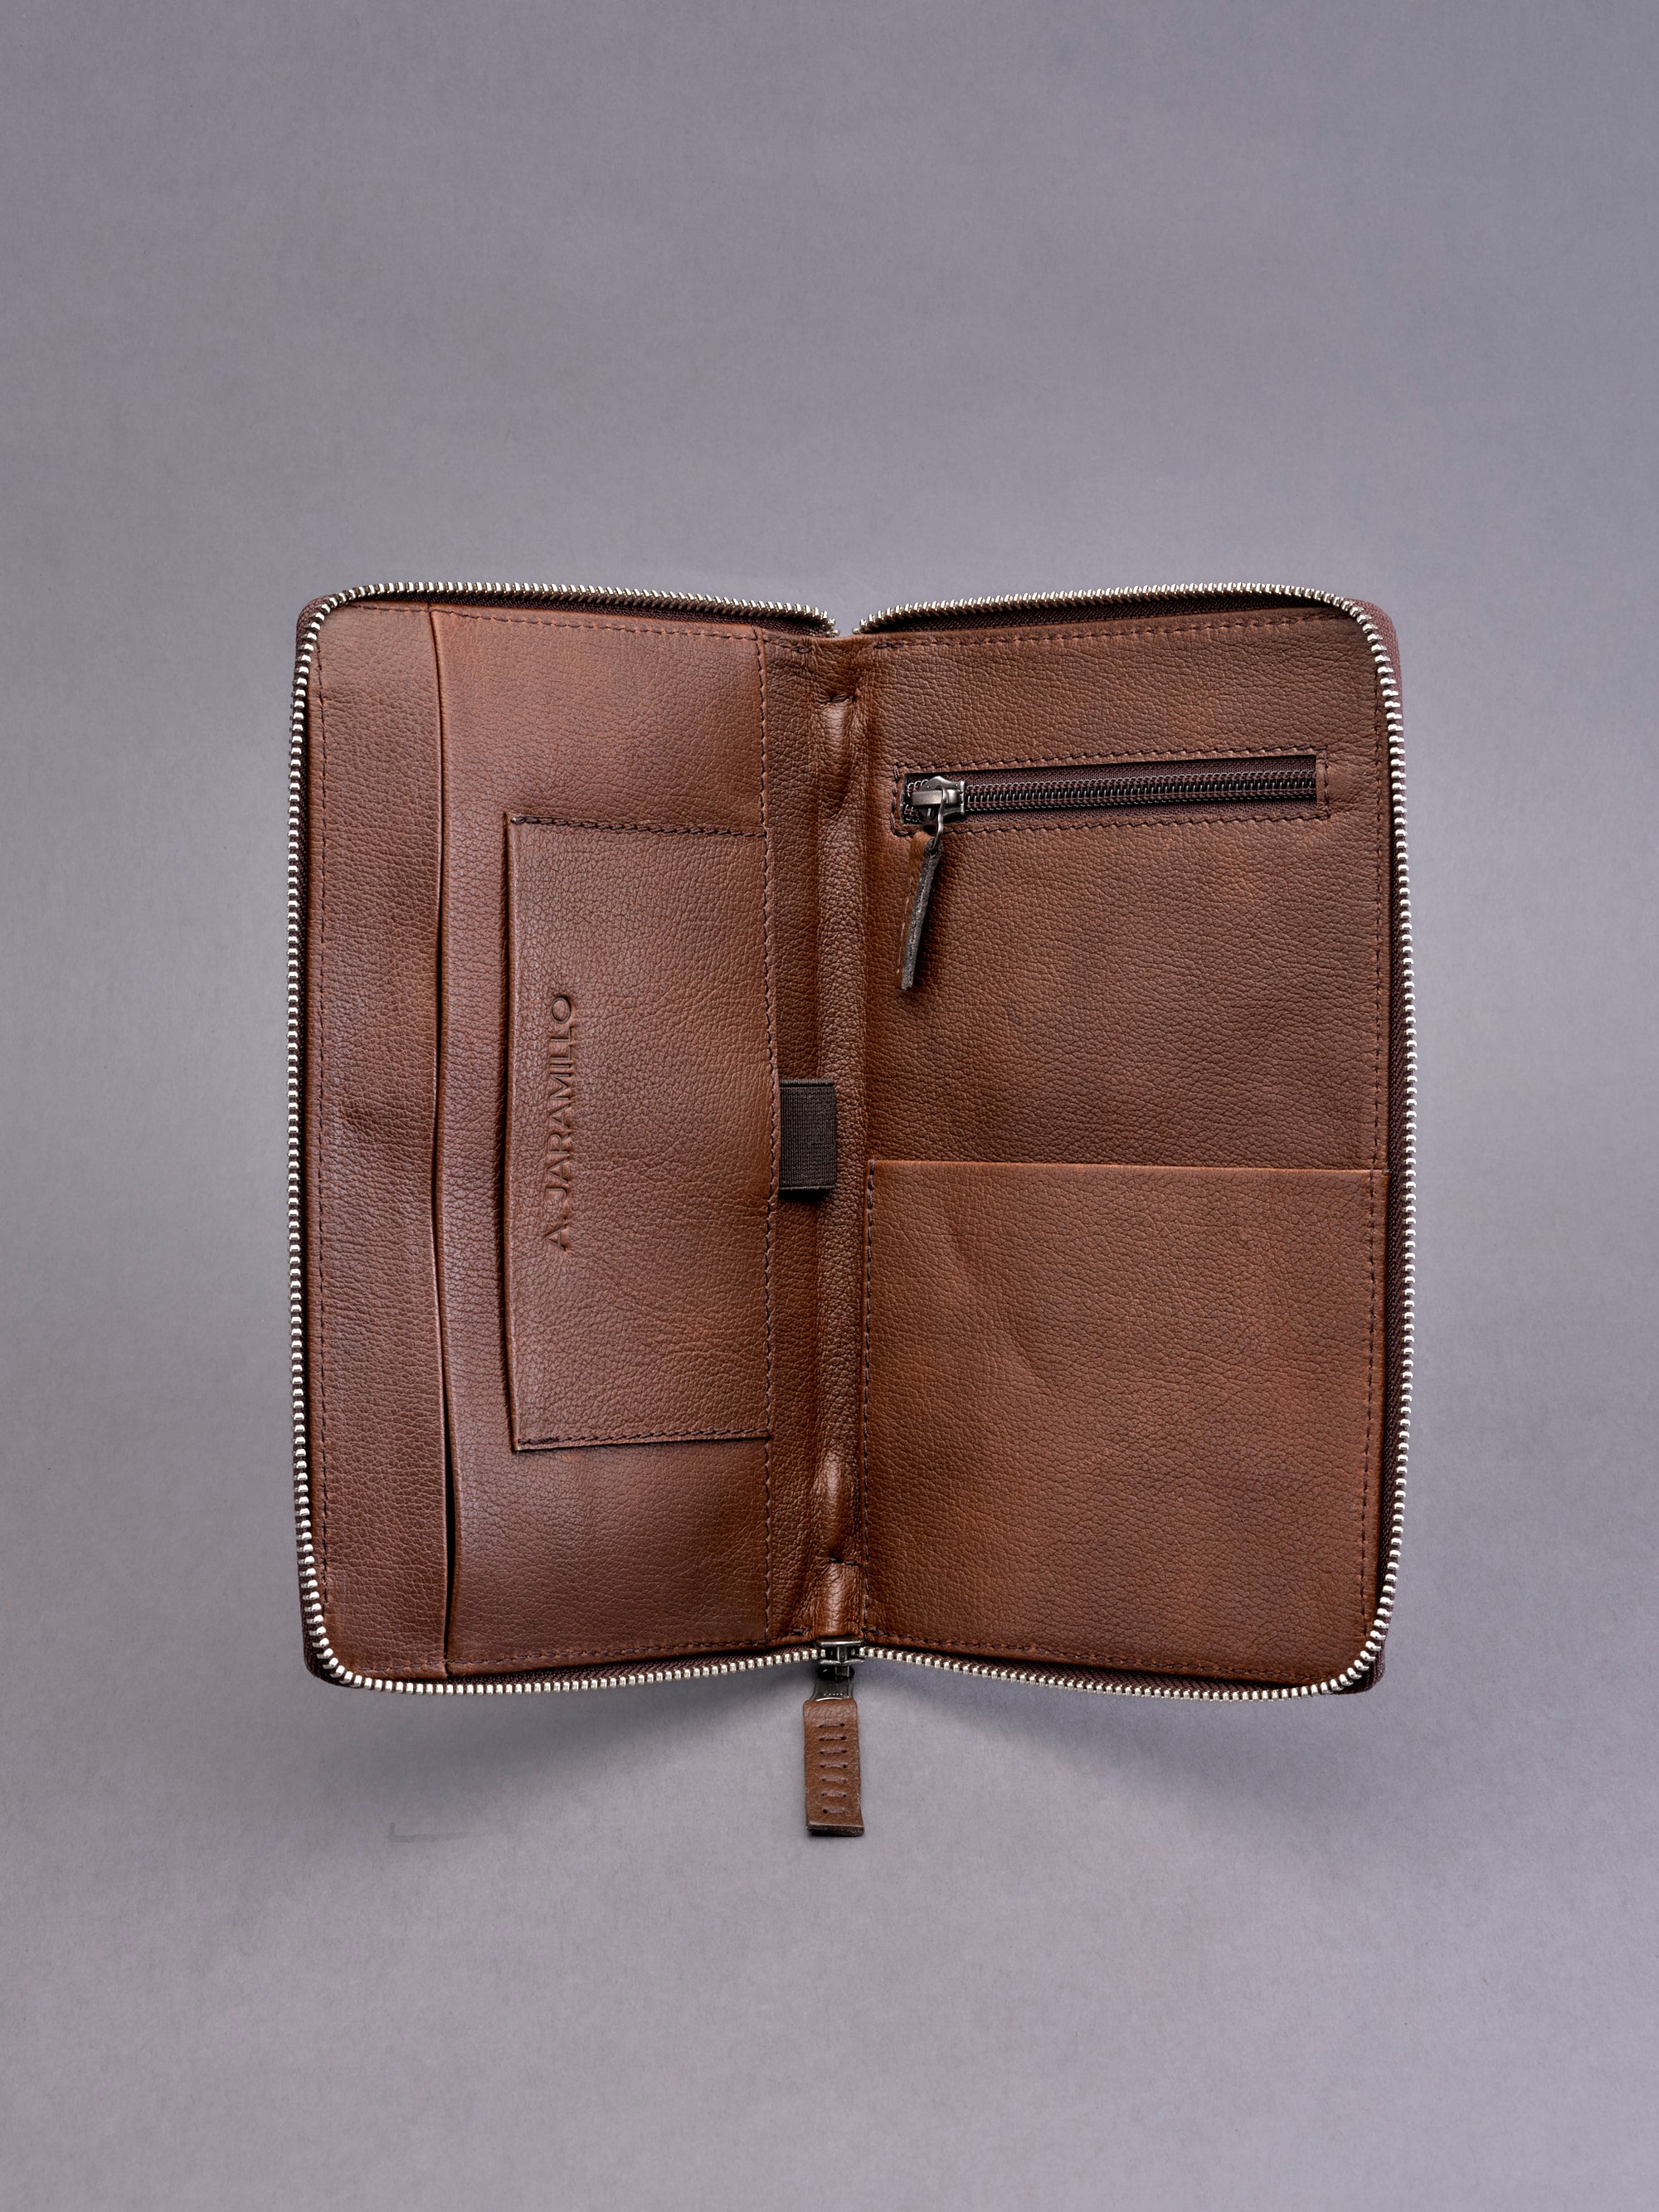 Leather interior. Brown Passport Holder for travelers, document organizer, travel journal by Capra Leather